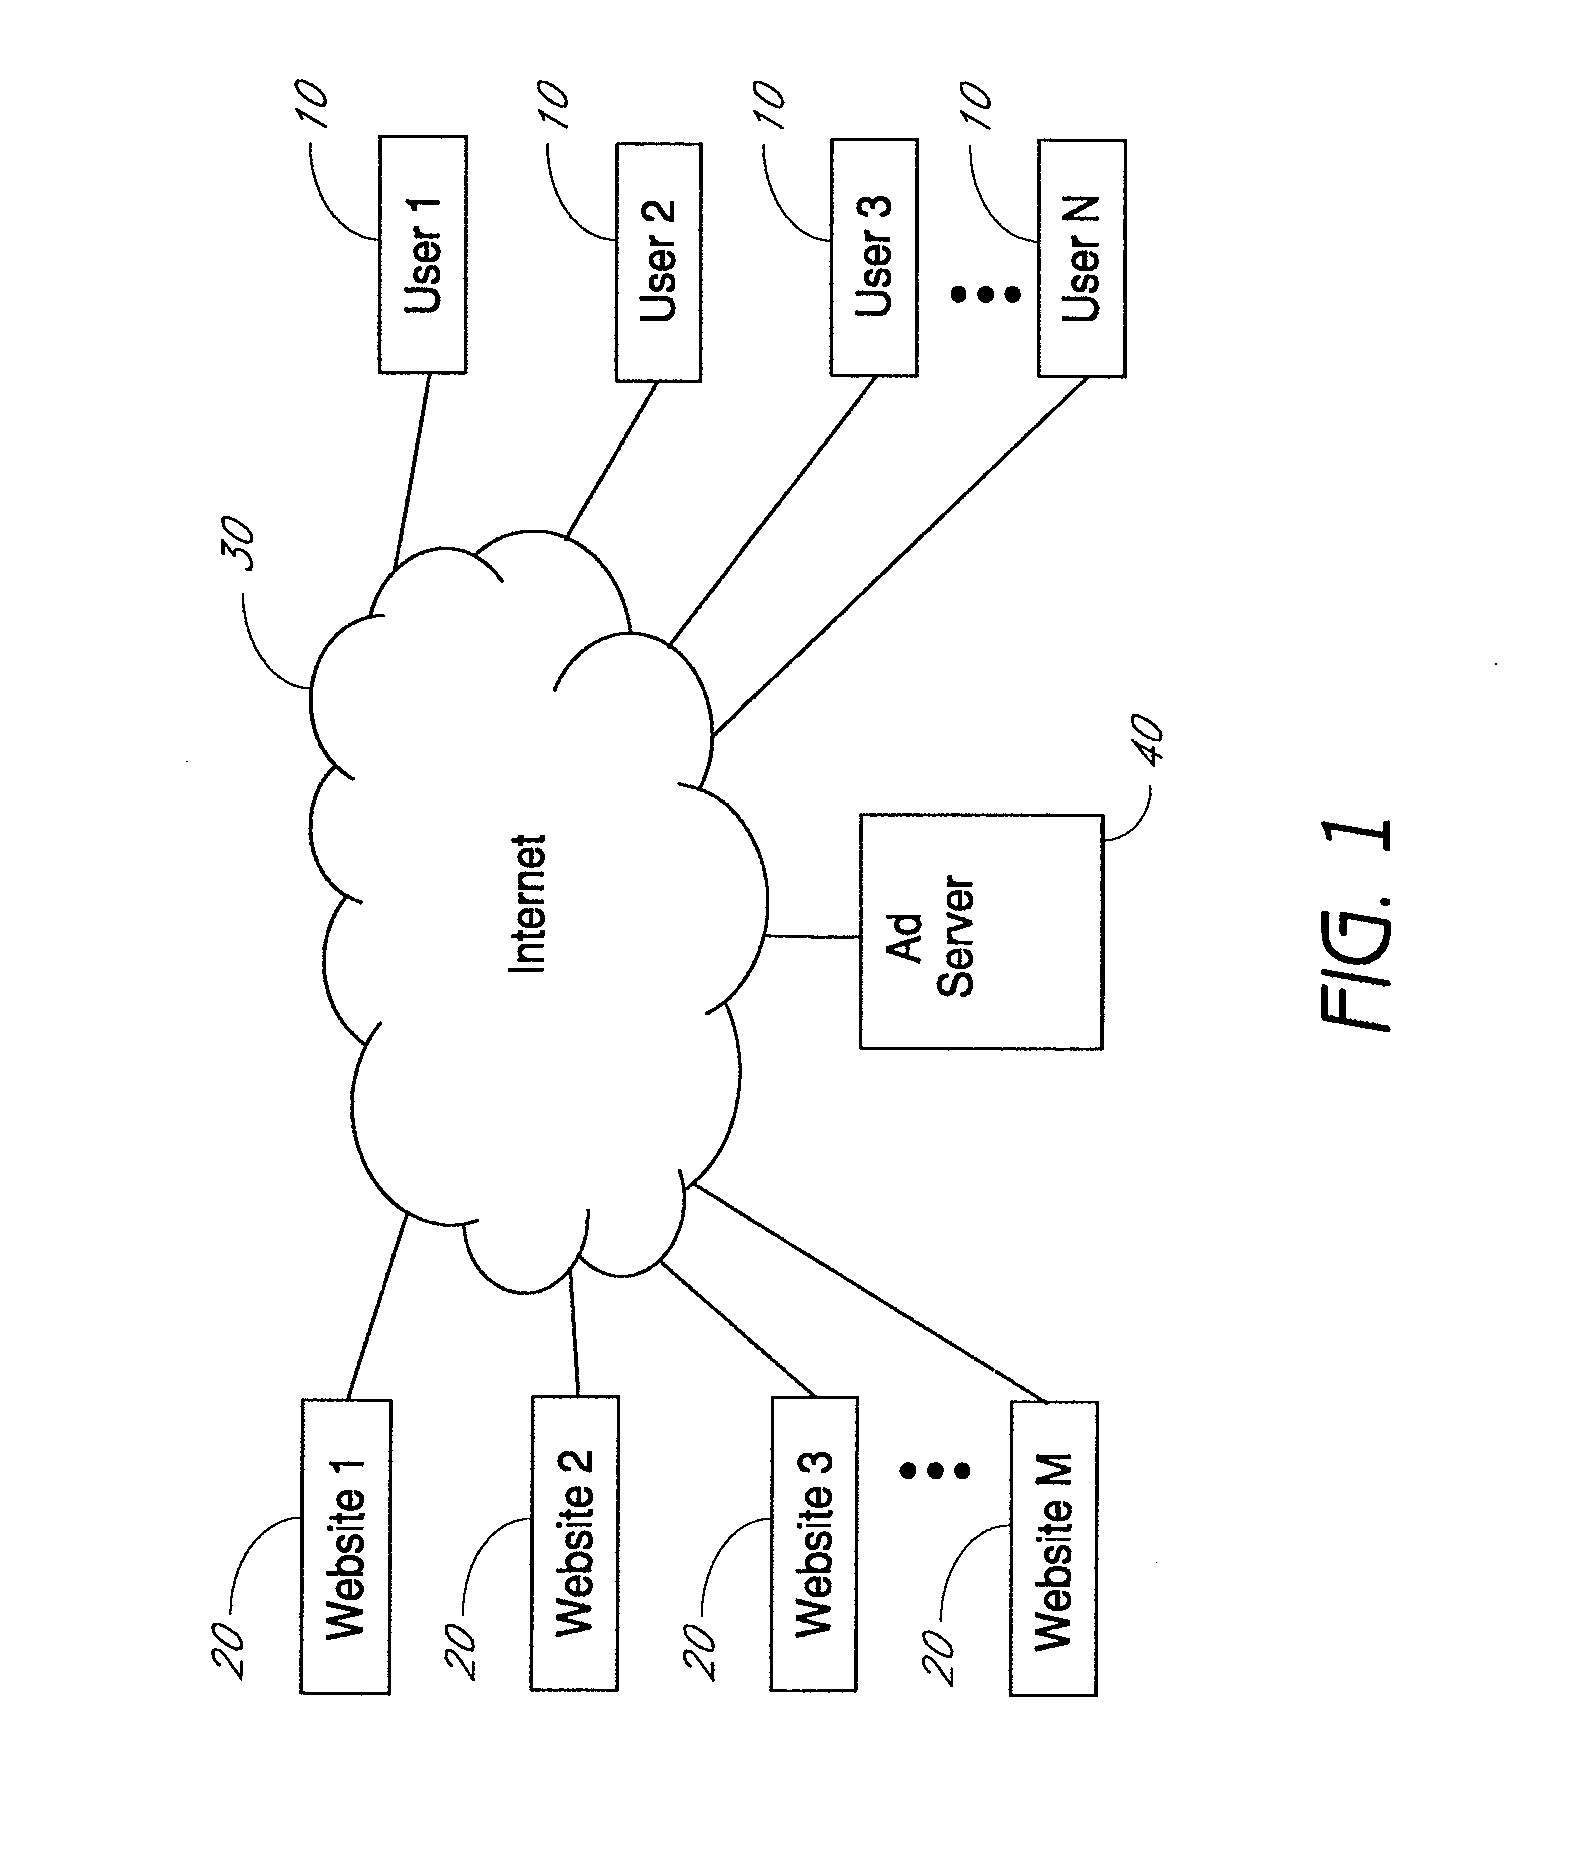 System and method of determining user demographic profiles of anonymous users